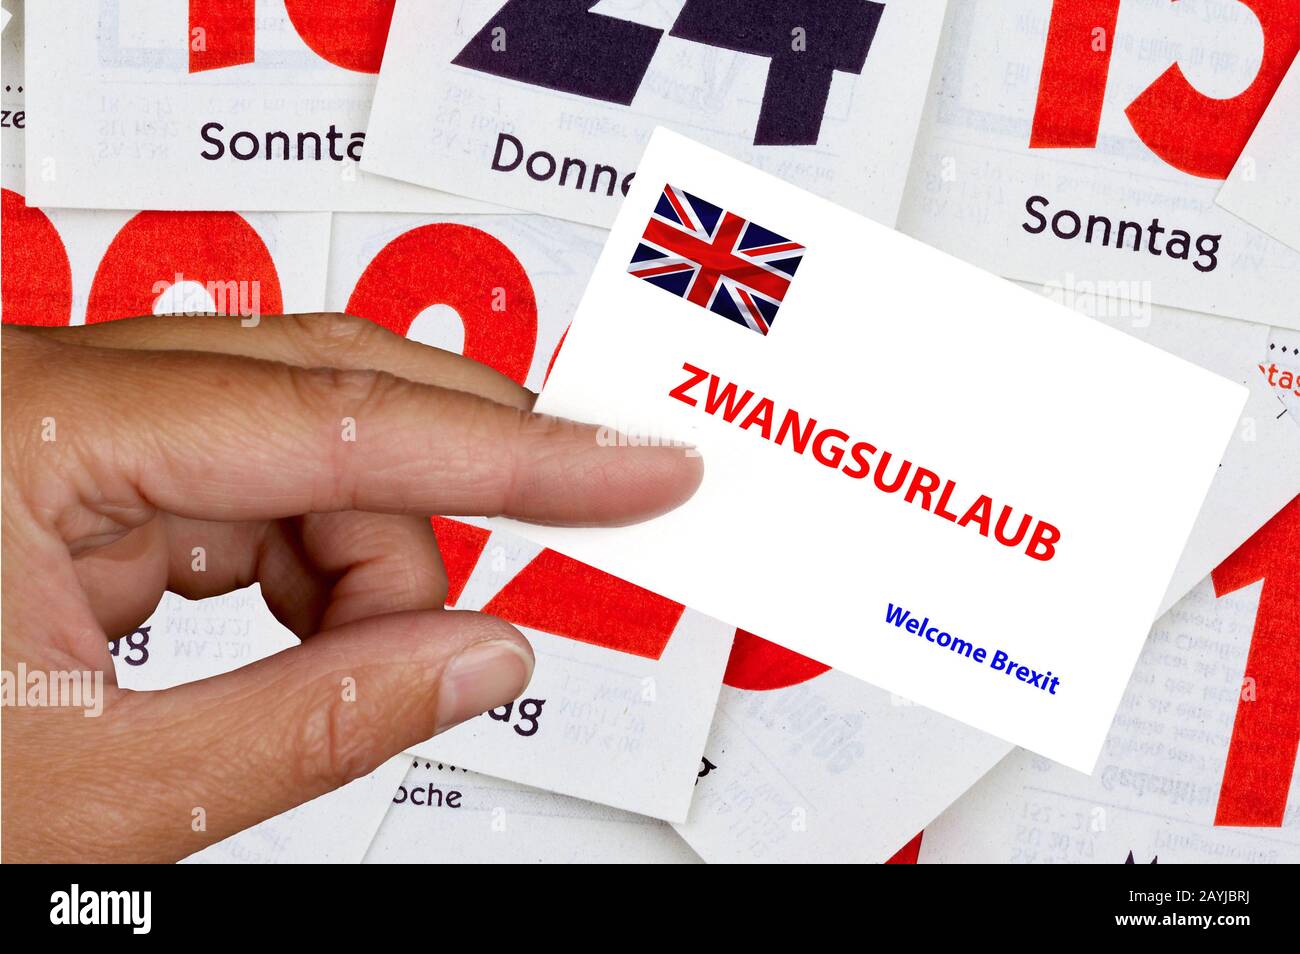 hand holding calling card with Union Jack lettering Zwangsurlaub, forced holiday, break of parliament, Welcome Brexit, composing, United Kingdom, England Stock Photo